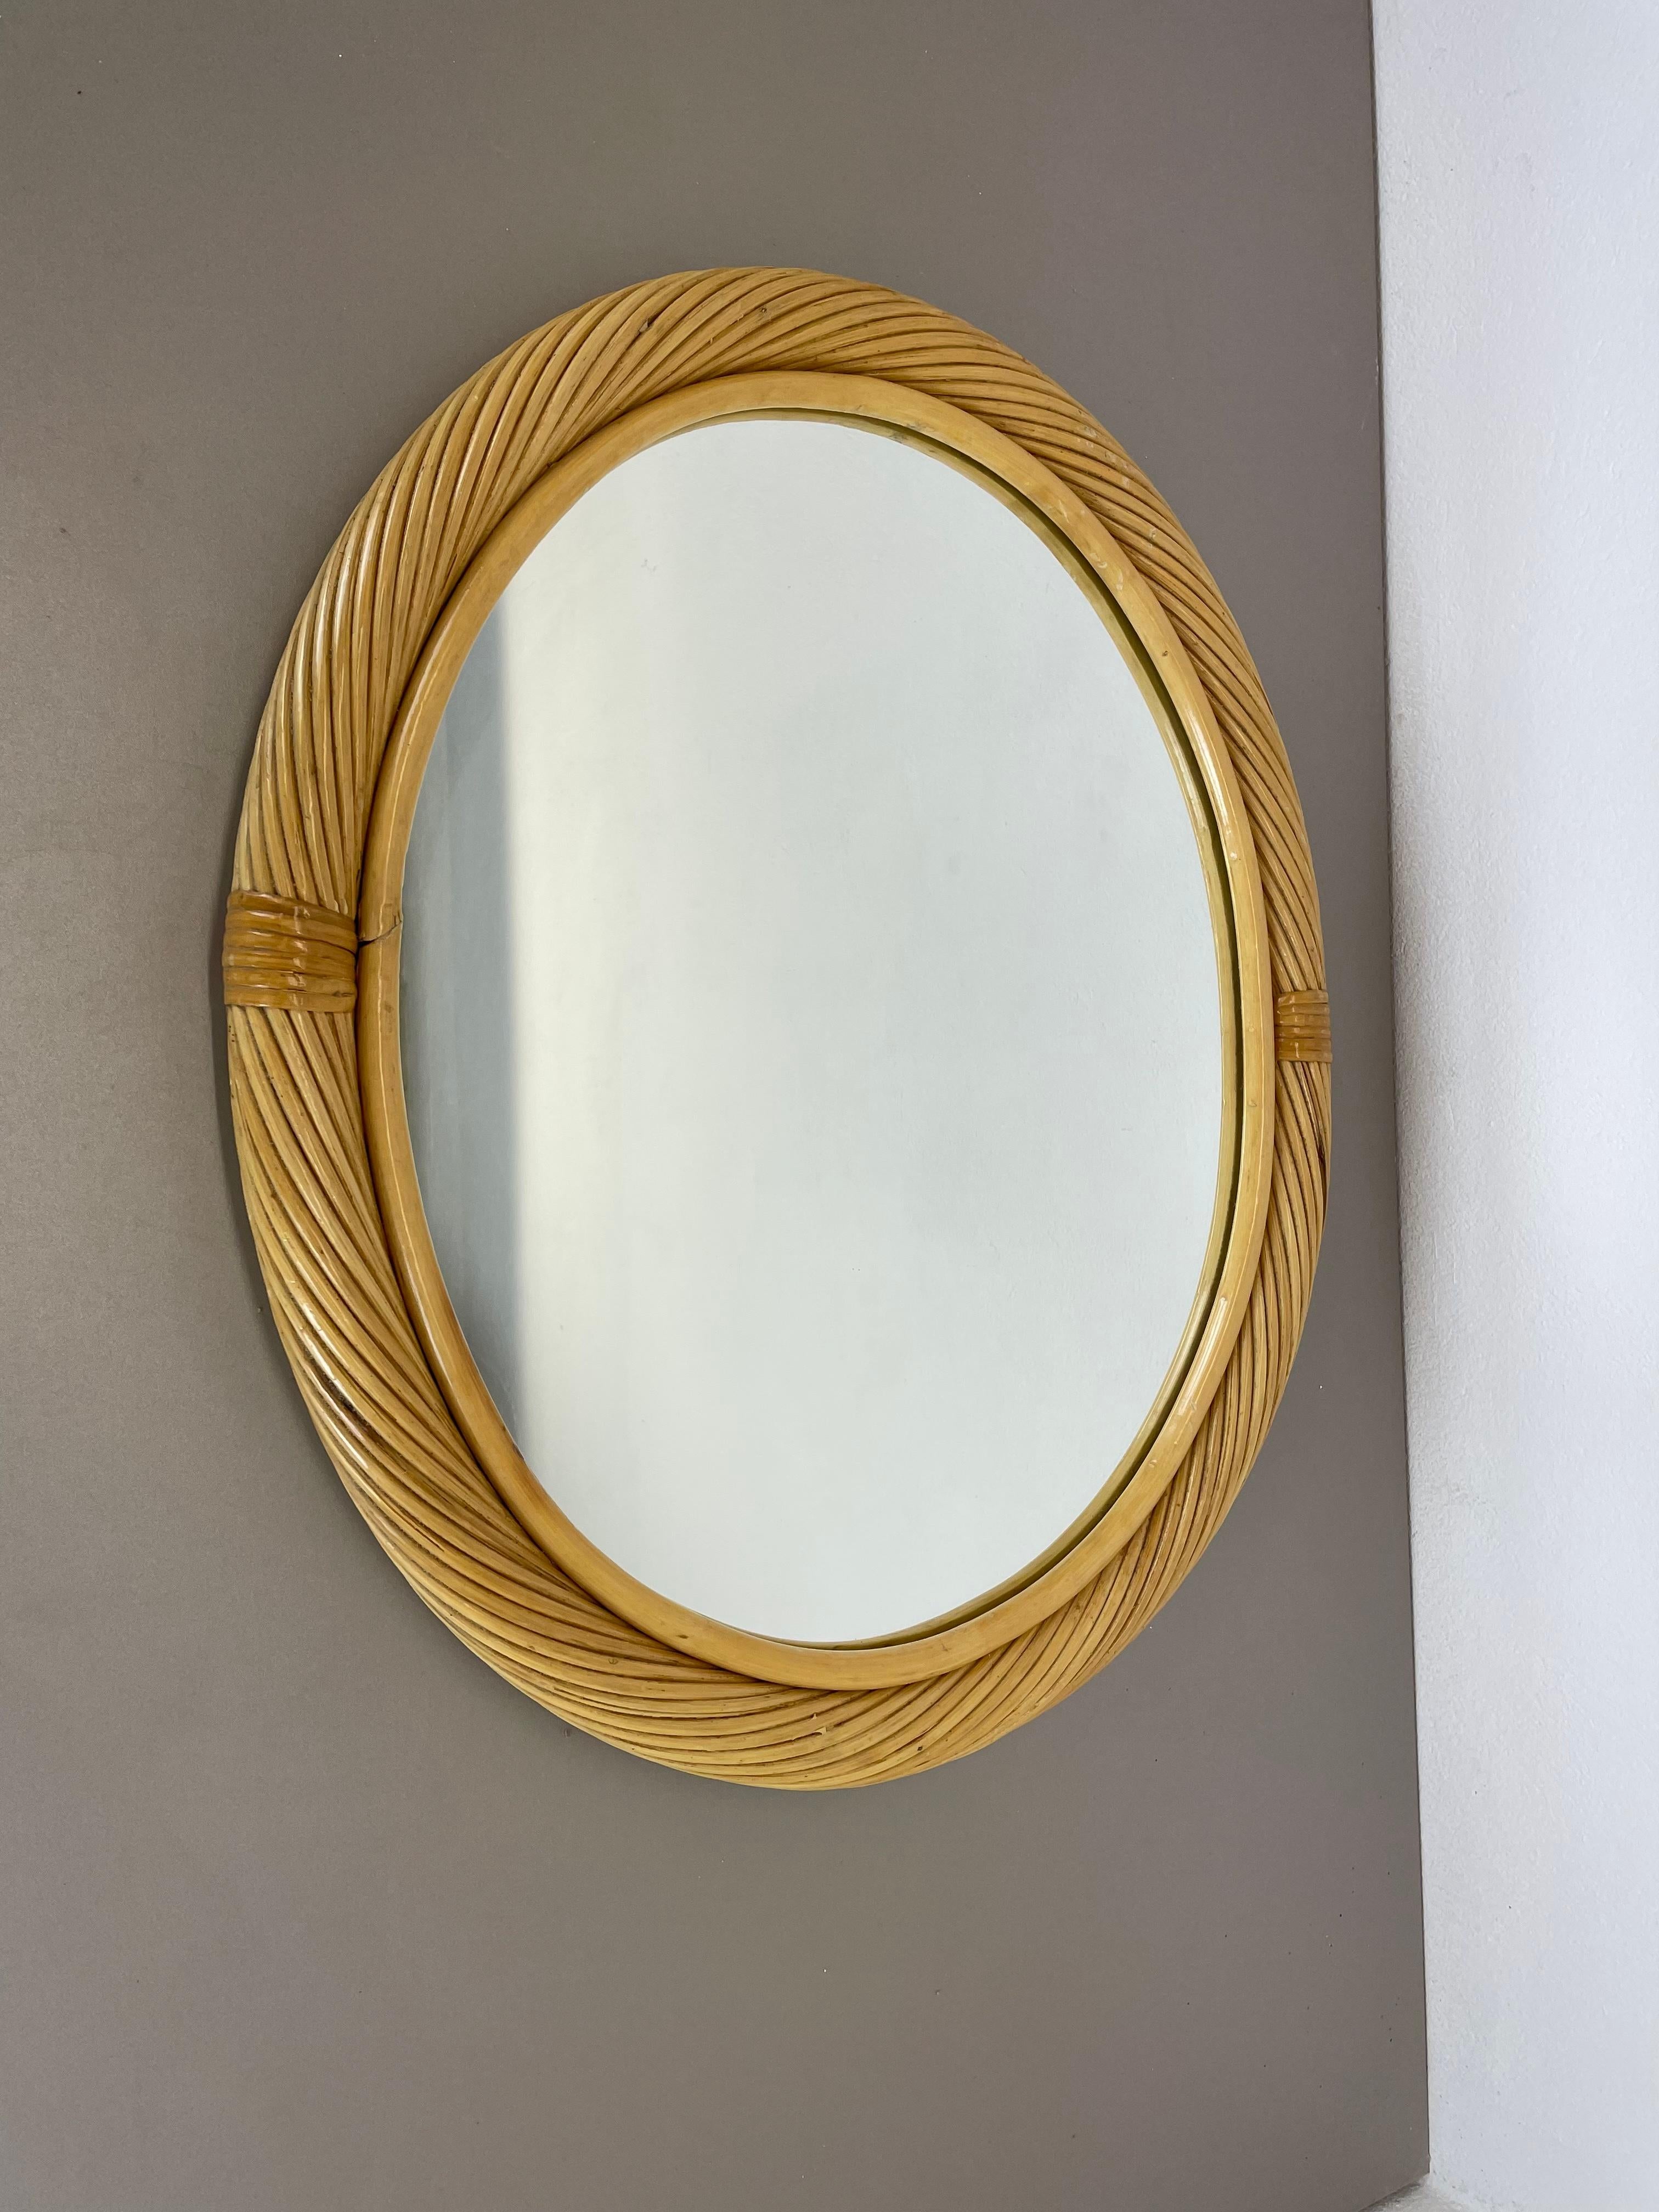 Mid-Century Modern Large Rattan Rotin Wall Mirror in Crespi Albini Style, Italy, 1970s For Sale